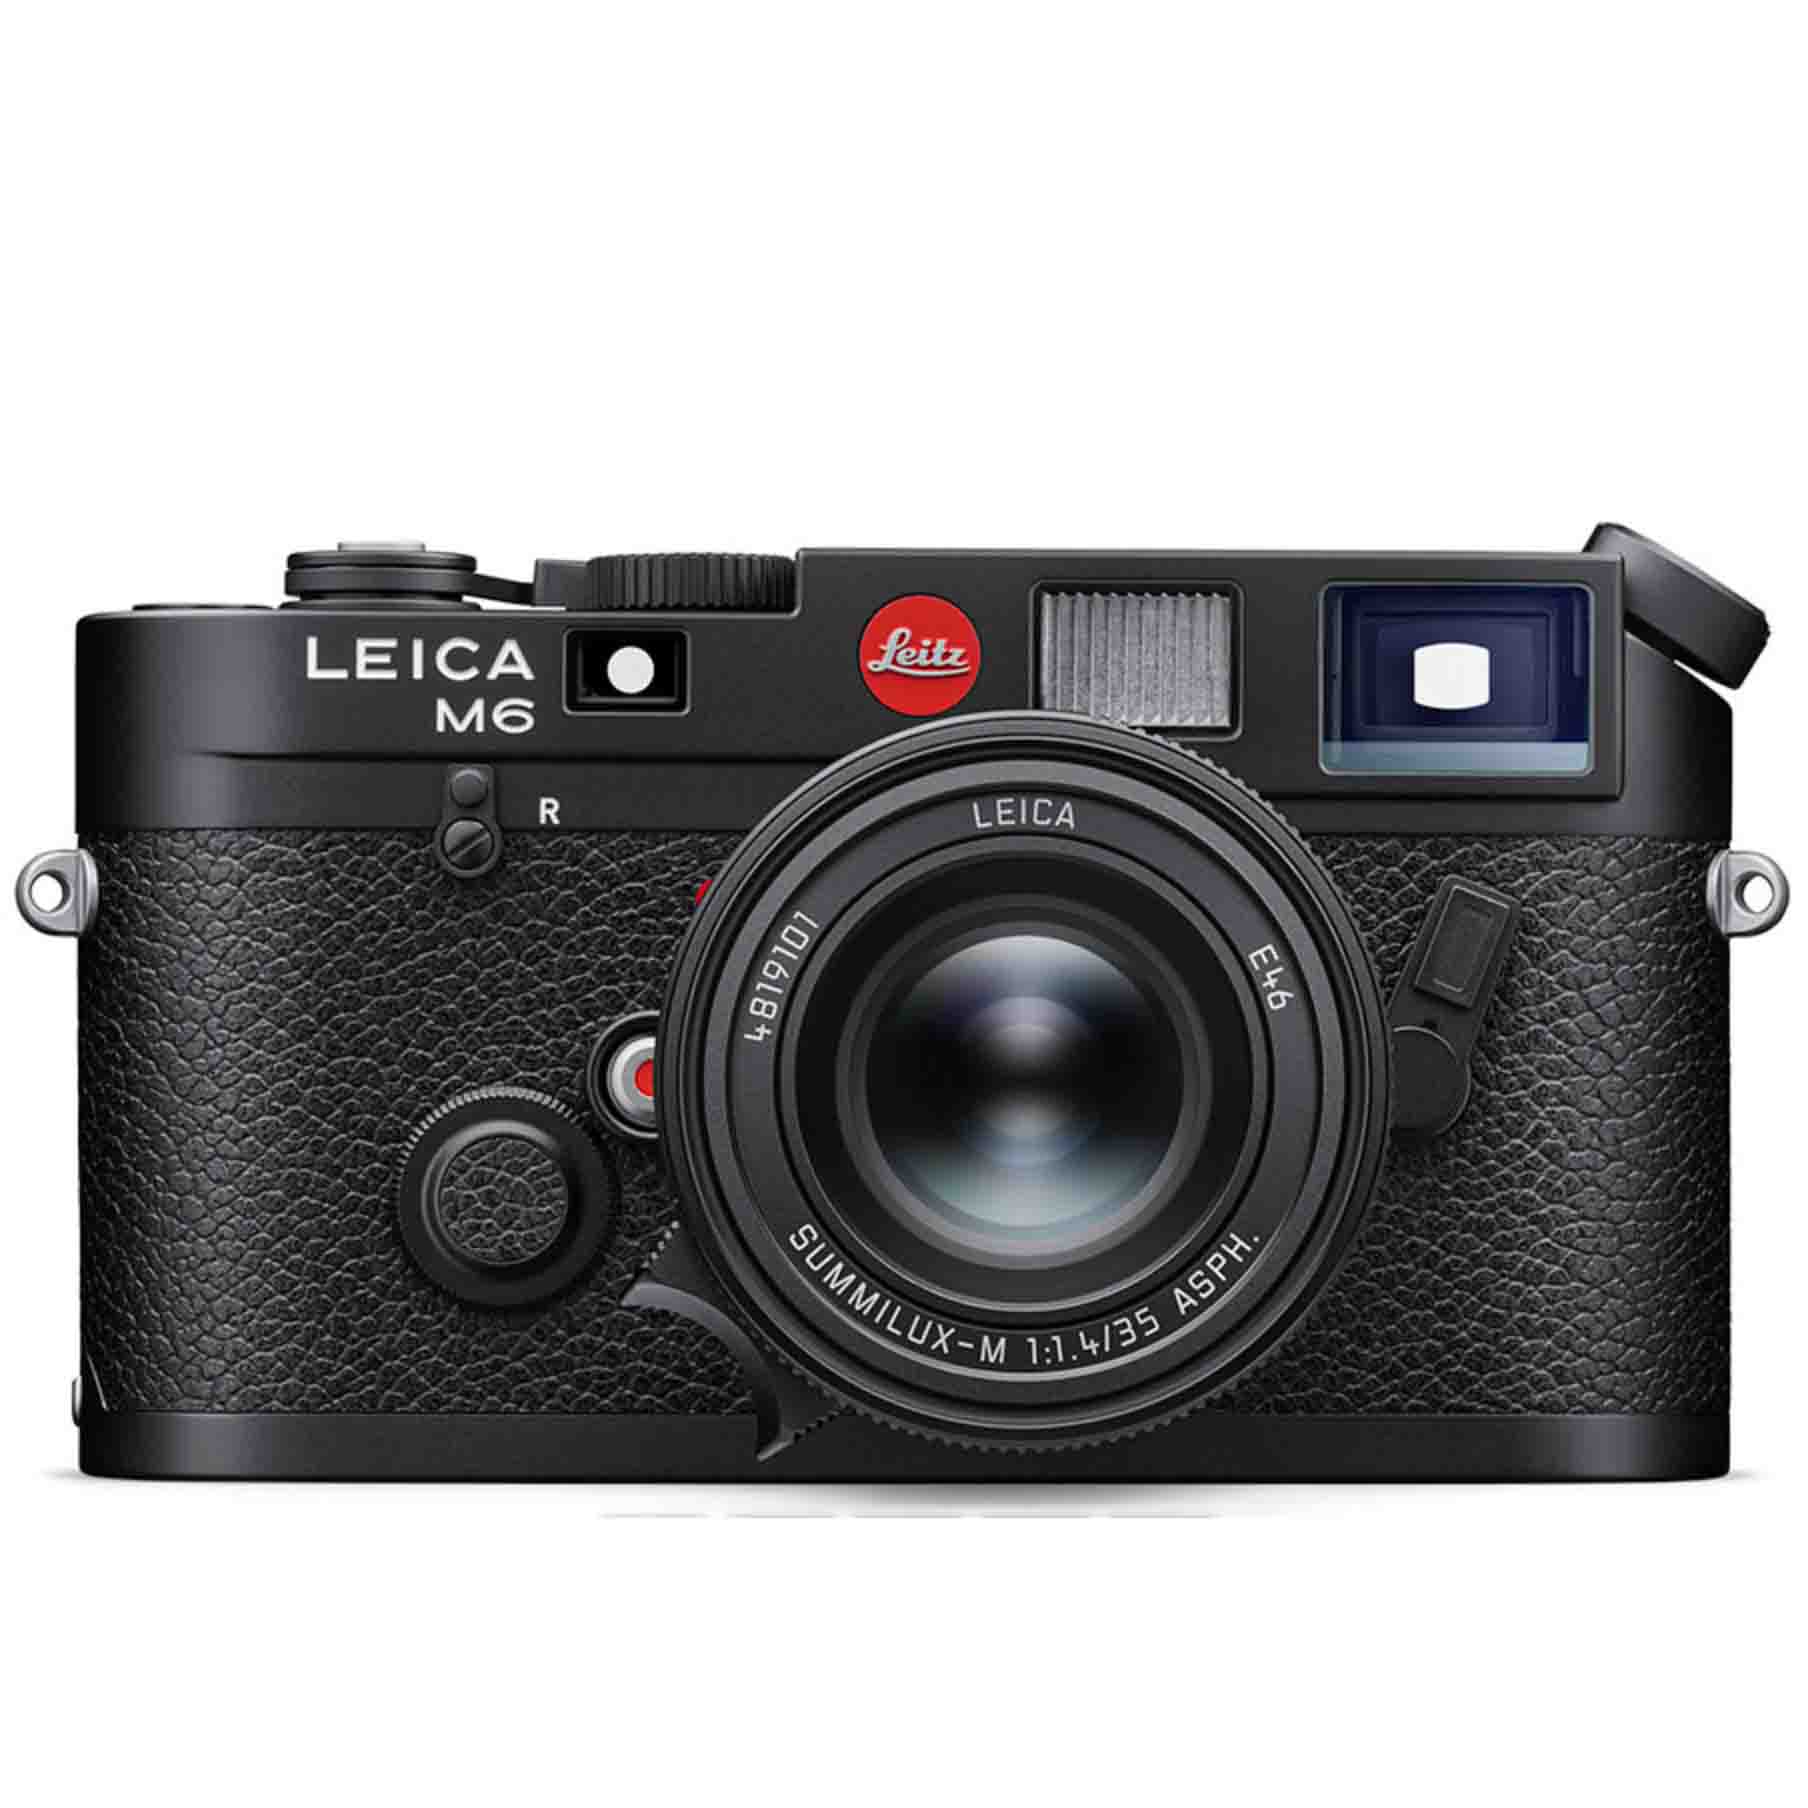 Front view of black Leica camera